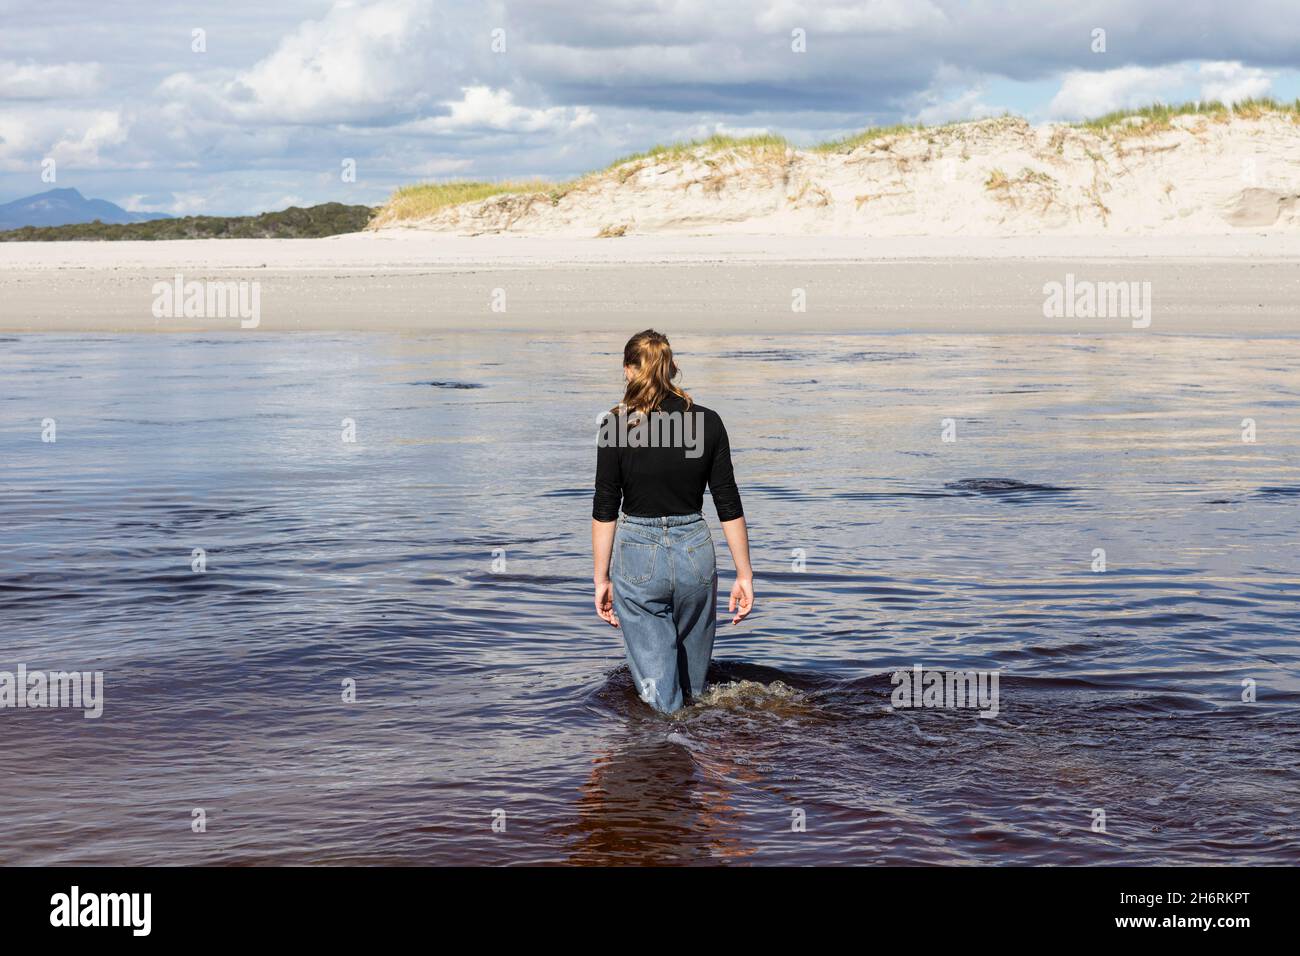 A teenage girl wading through a water channel on a wide sandy beach. Stock Photo